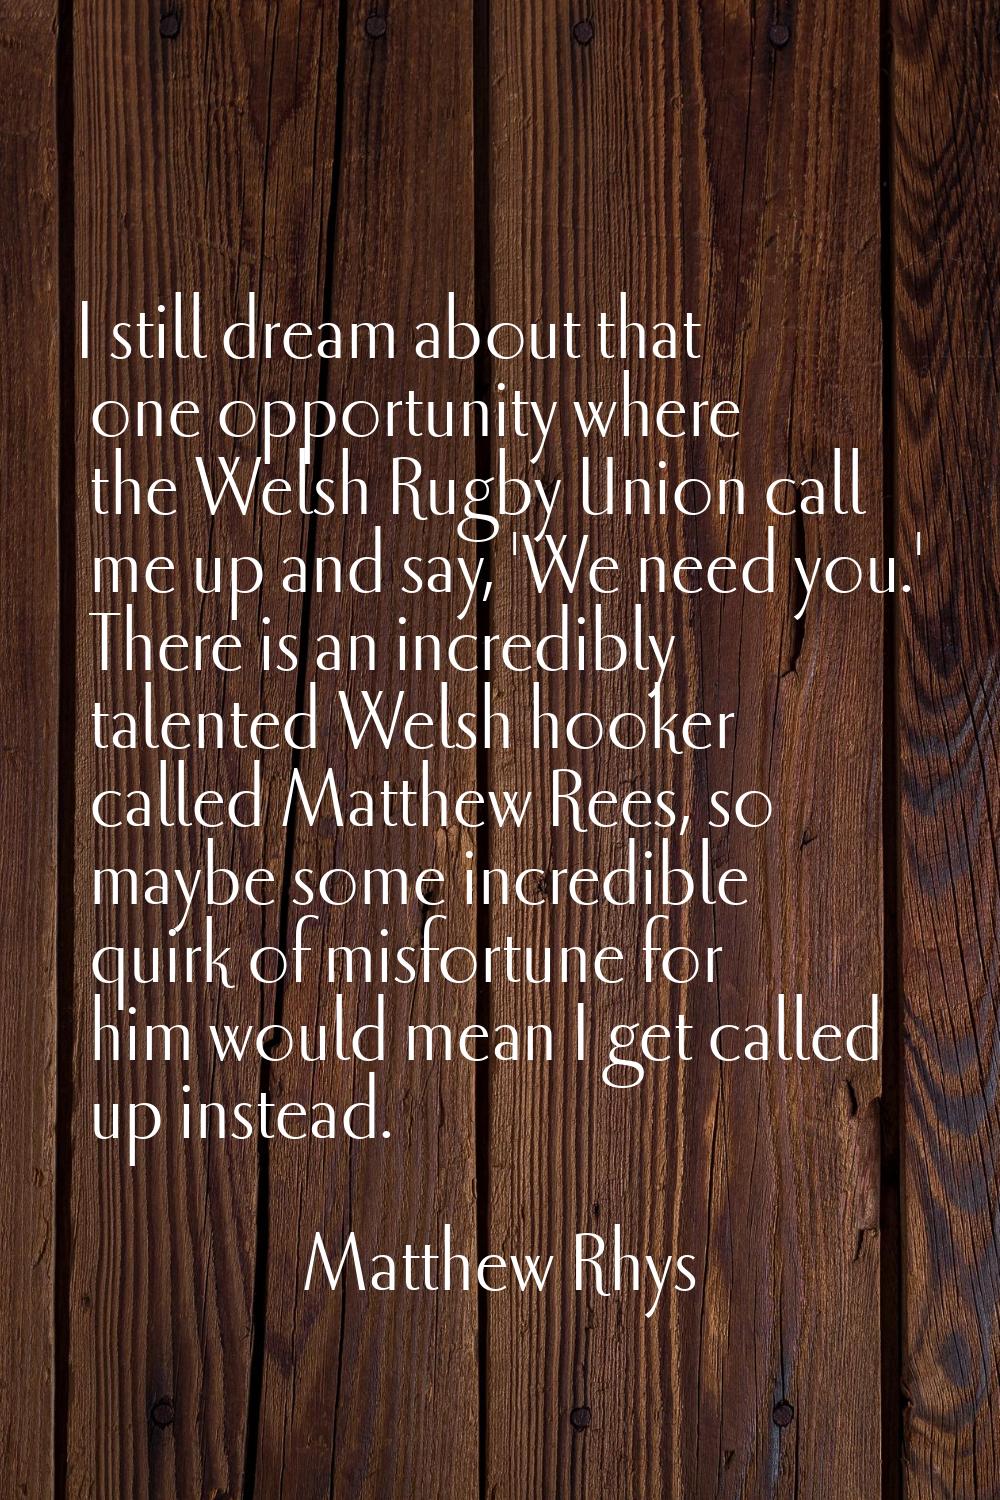 I still dream about that one opportunity where the Welsh Rugby Union call me up and say, 'We need y